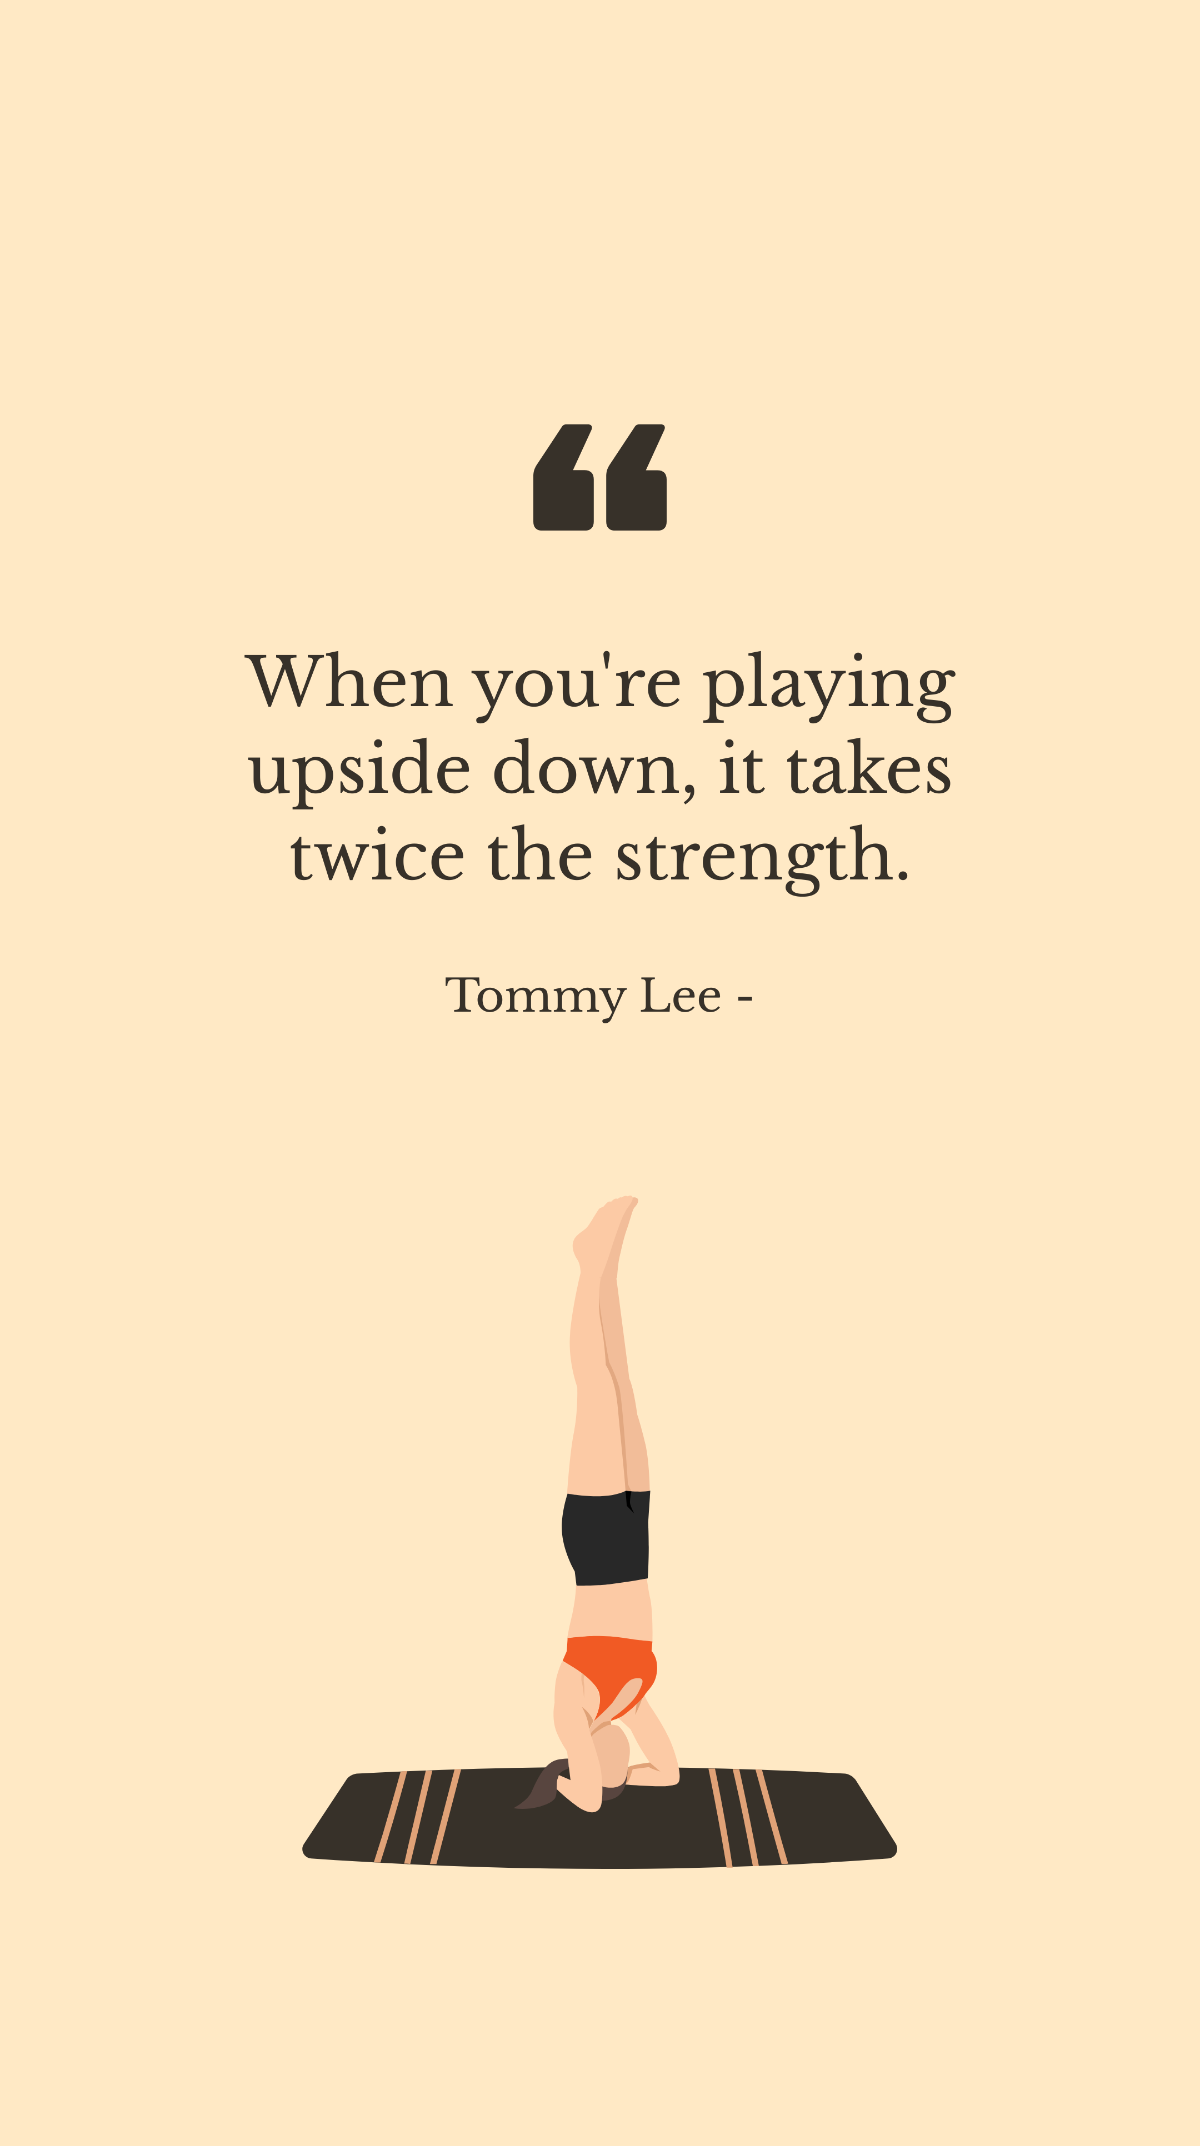 Tommy Lee - When you're playing upside down, it takes twice the strength. Template